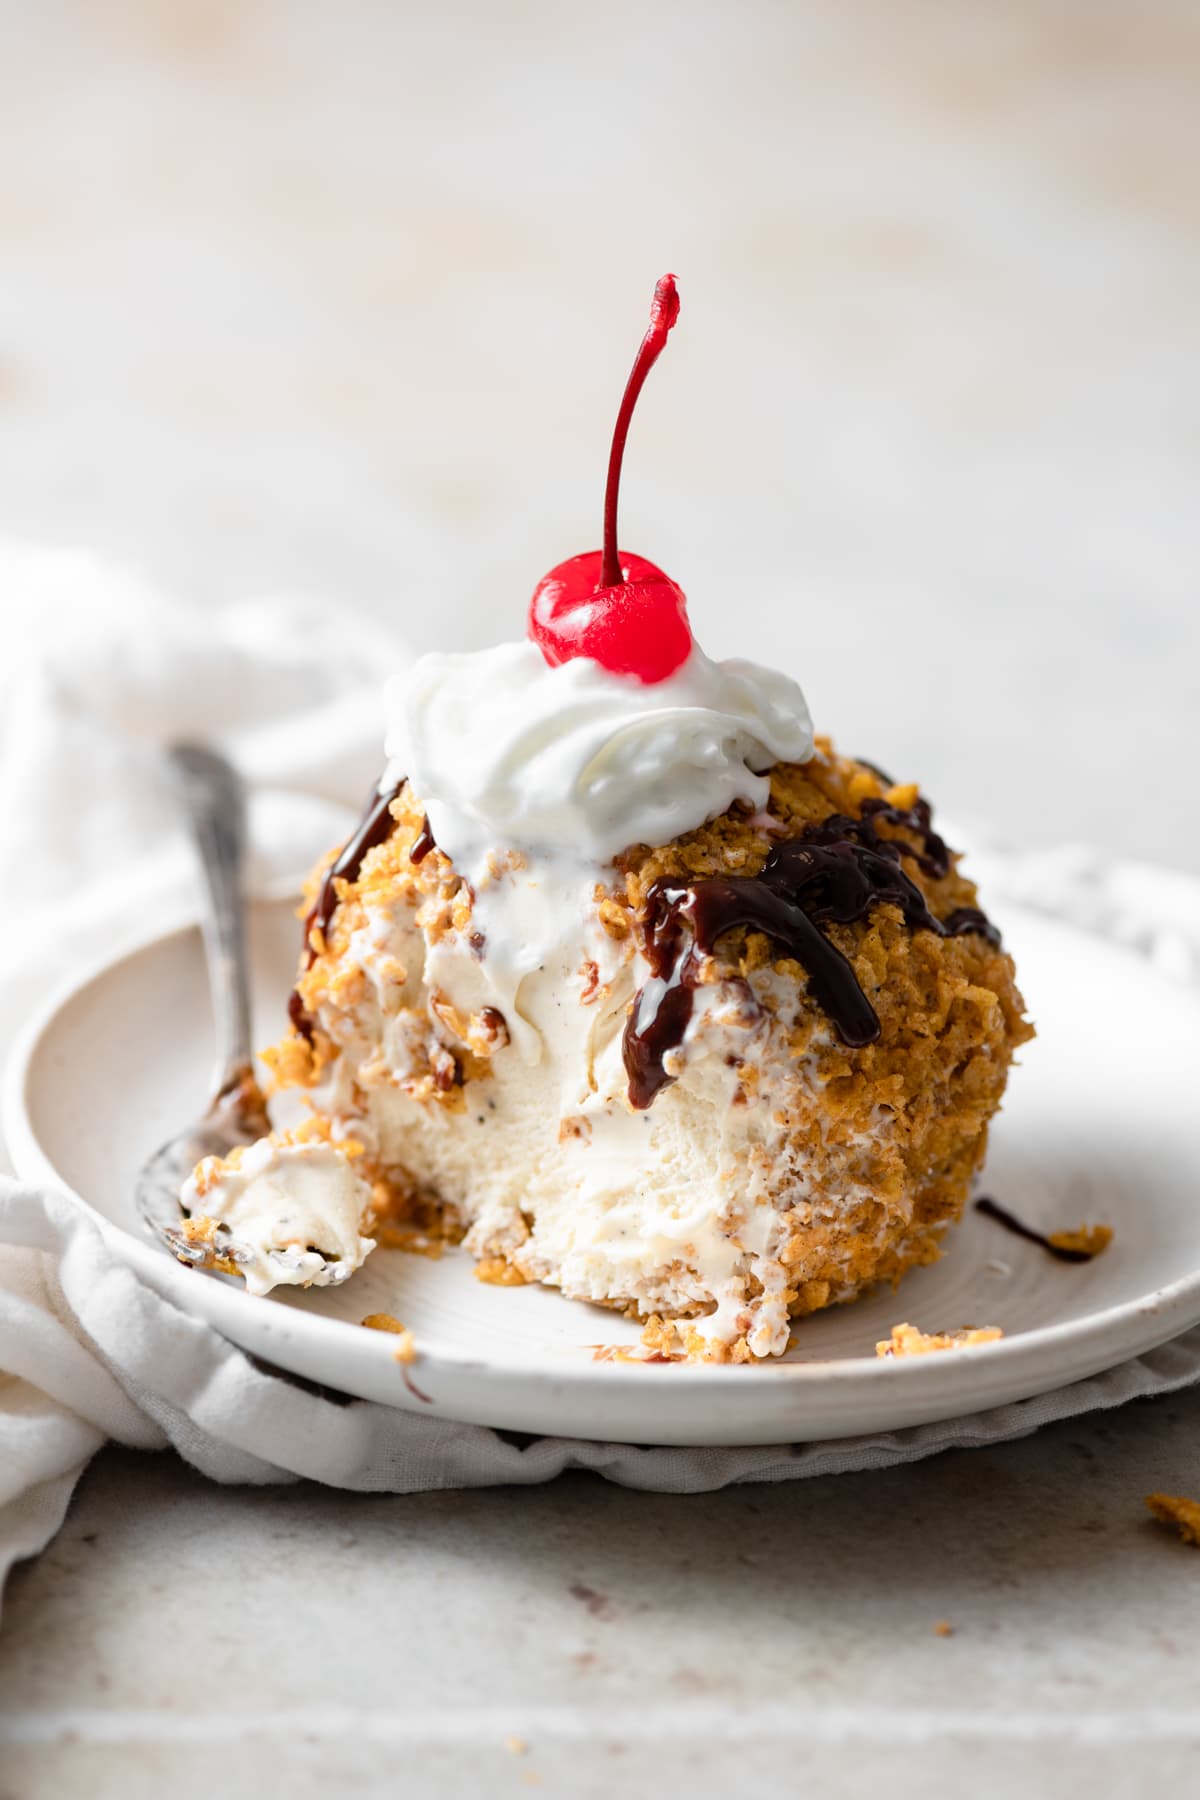 Fried ice cream cut into to show ice cream center. It is drizzled with chocolate sauce, topped with whipped cream and a maraschino cherry.